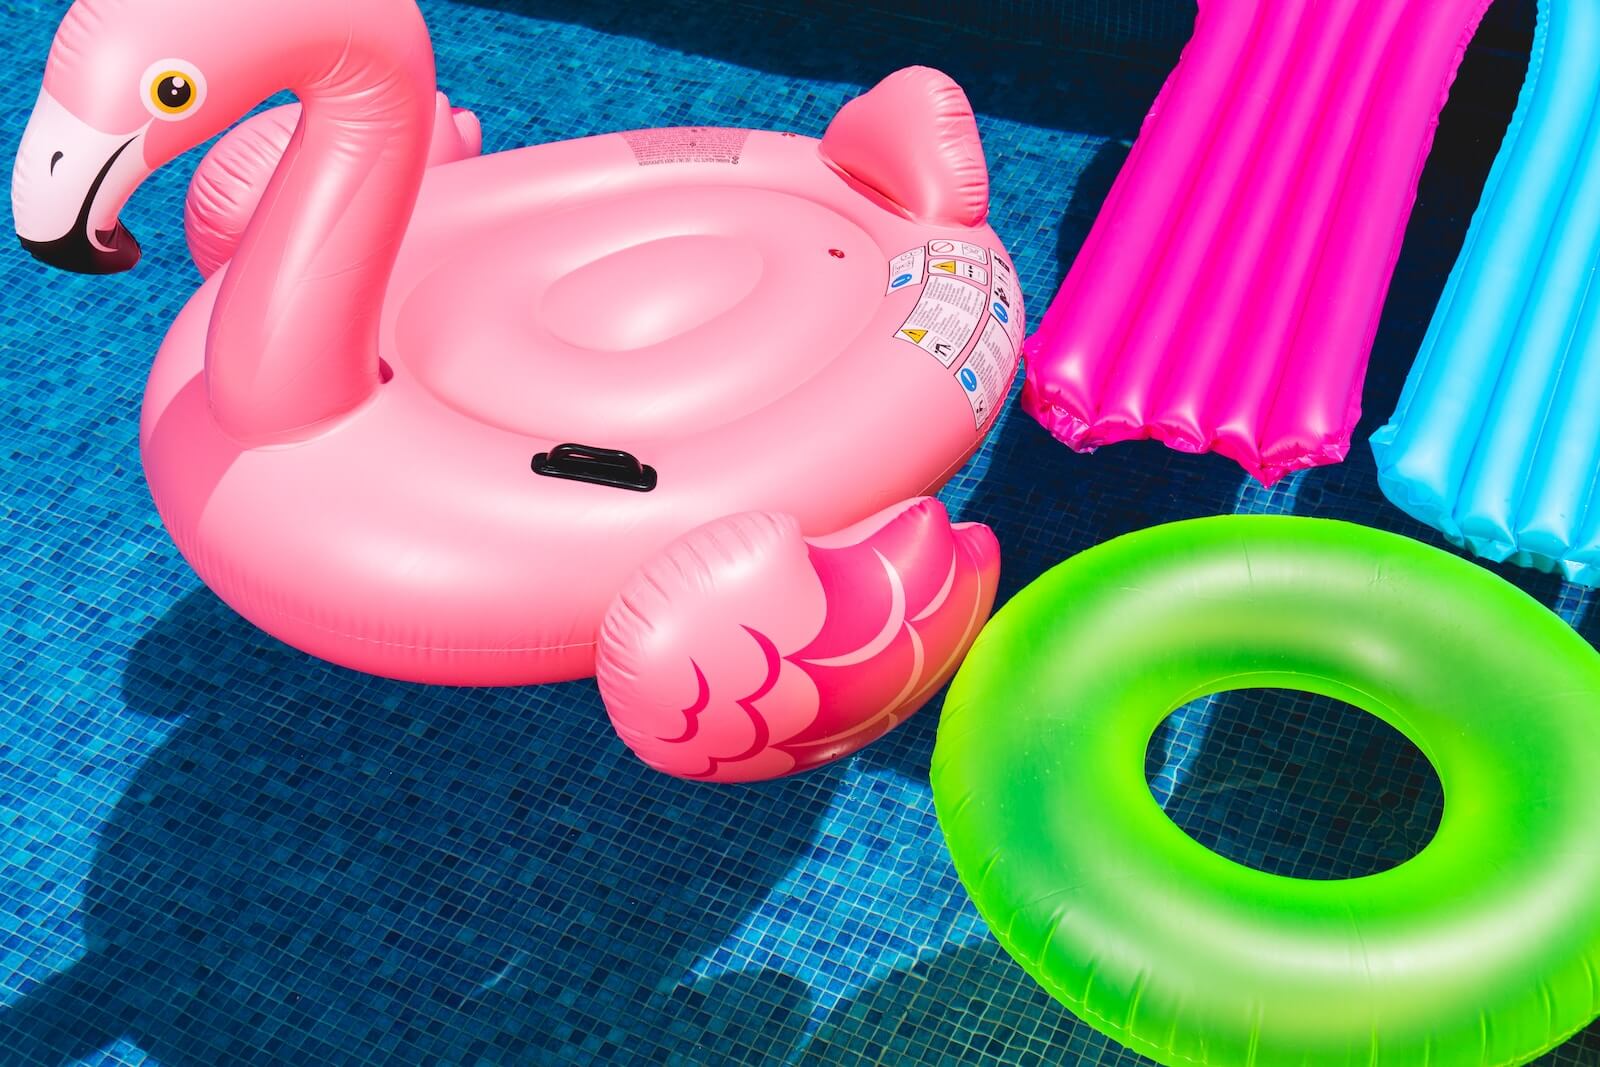 Best Pool Floats: Top 5 Rafts Most Recommended For Relaxation And Fun ...